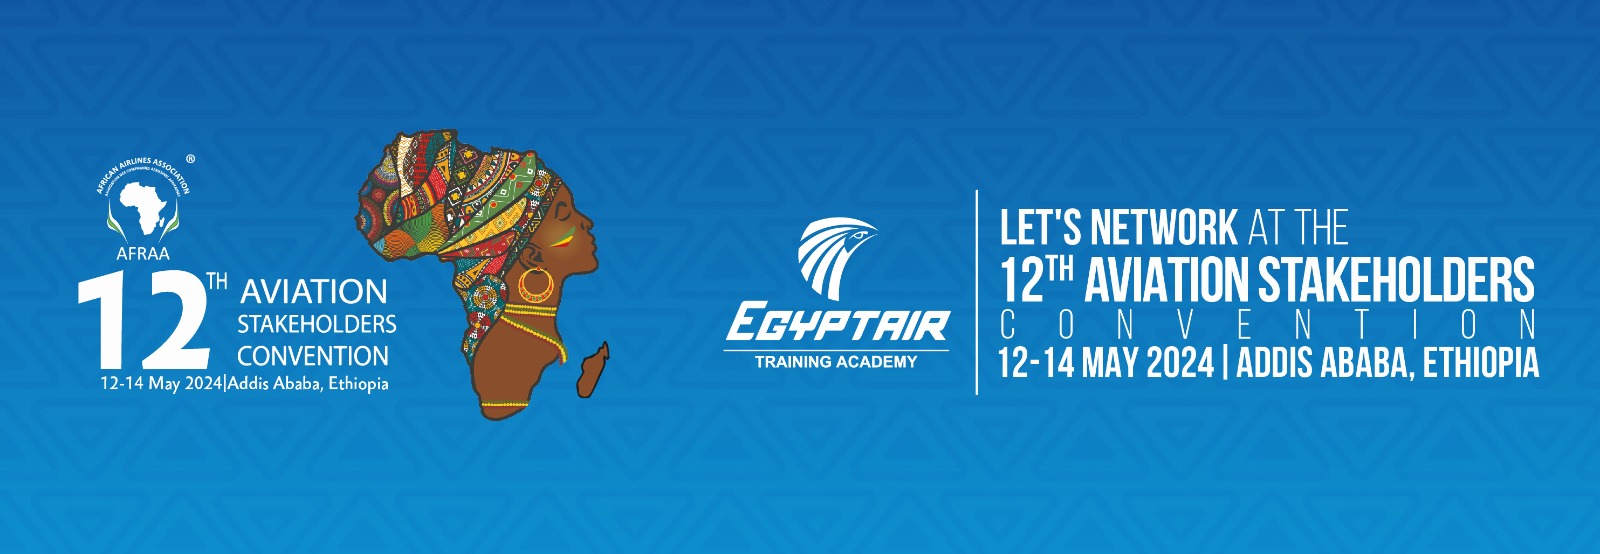 EGYPTAIR TRAINING ACADEMY Participation in the 12th Aviation Stakeholders’ Convention in Addis Ababa from 12 to 14 May 2024